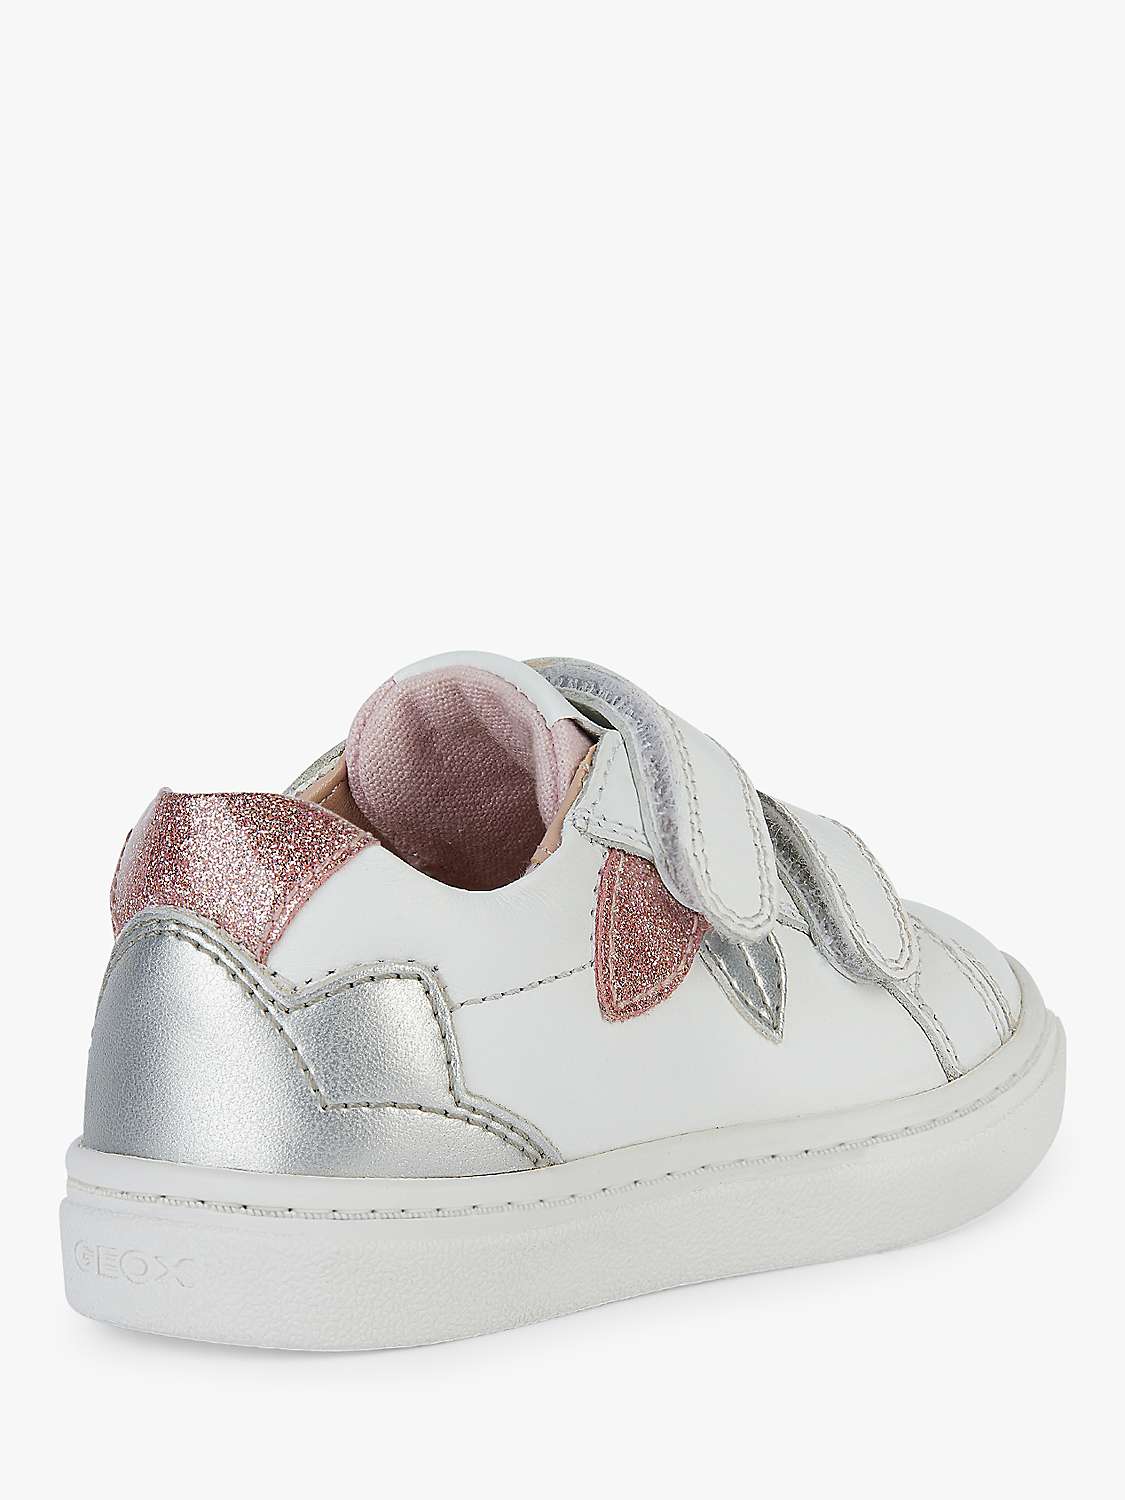 Buy Geox Kids' Nashik Pearlescent Leather Blend Trainers, White/Silver Online at johnlewis.com